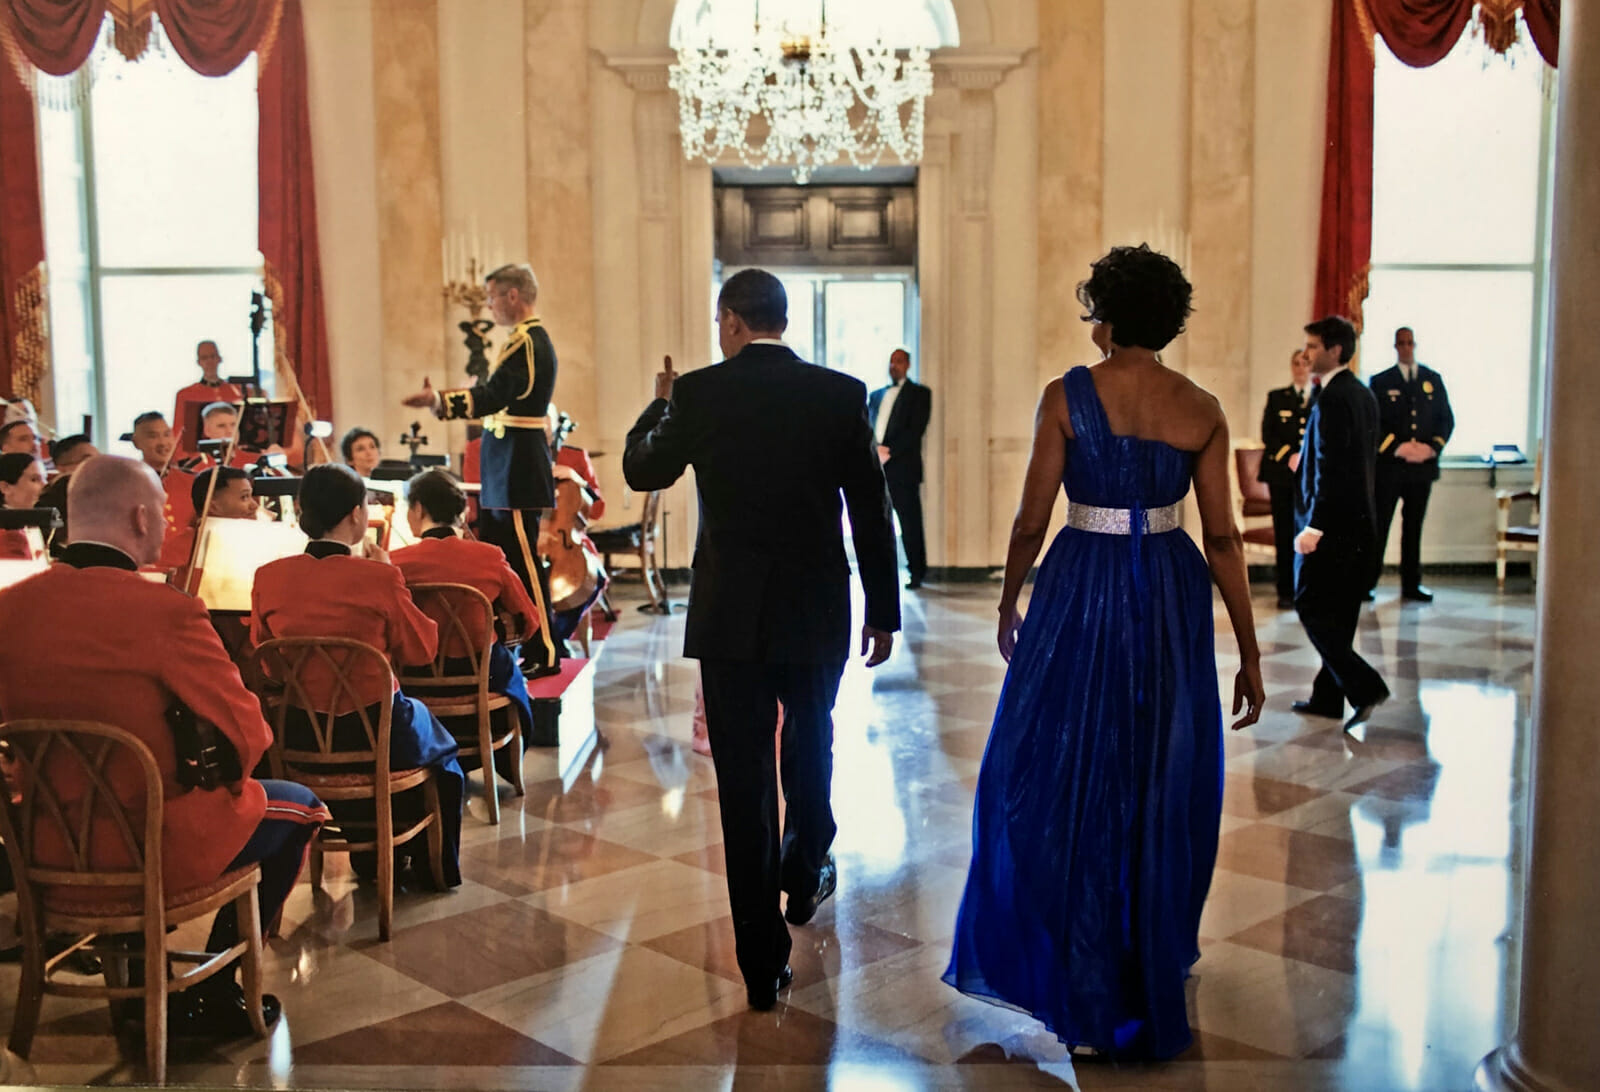 U.S. Marine Orchestra at the White House with President and Mrs. Obama